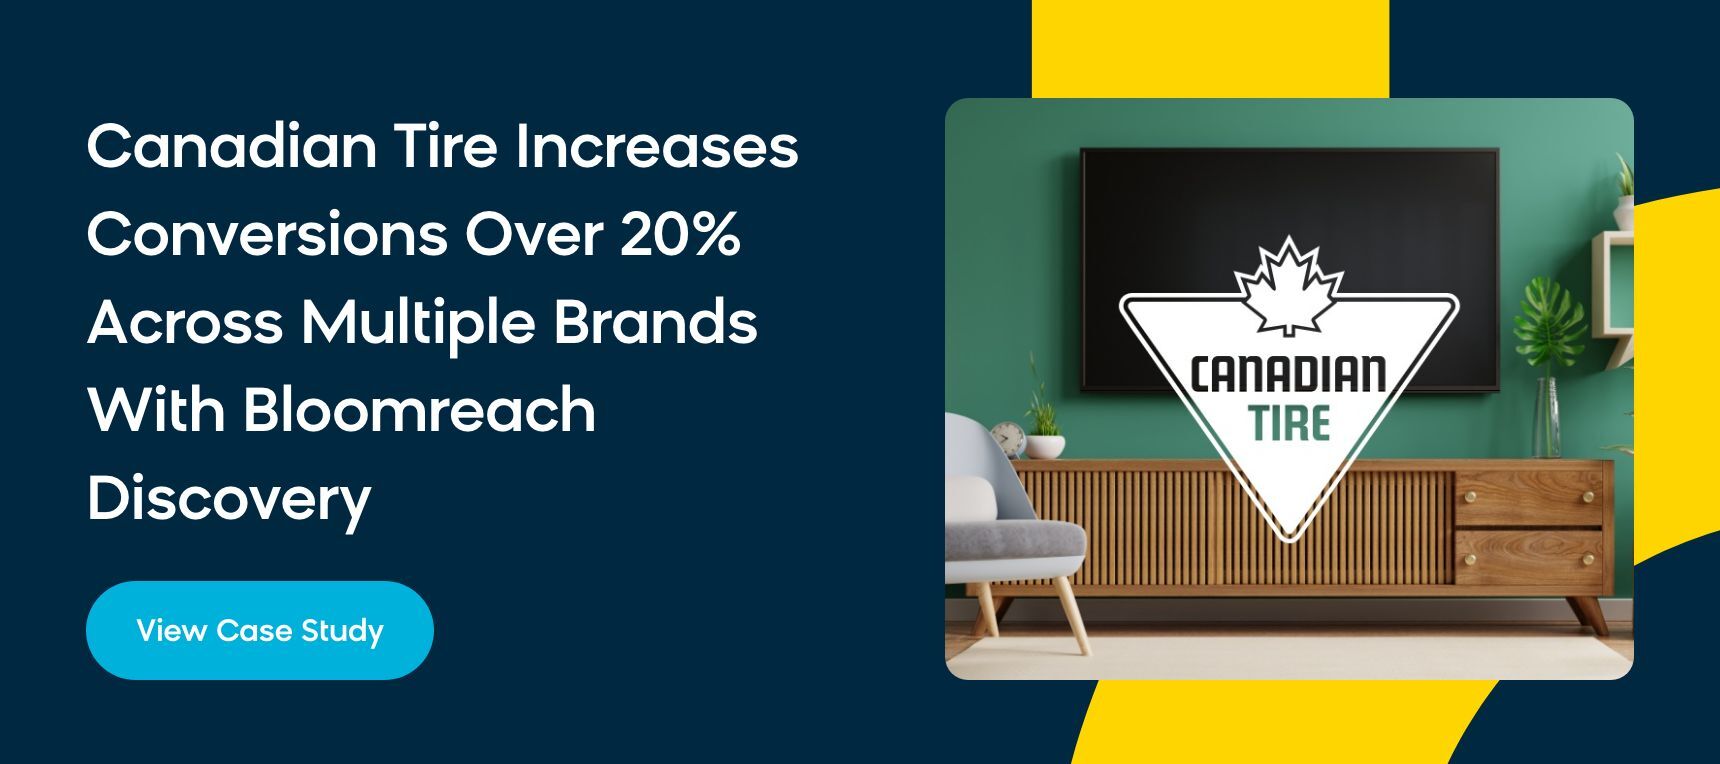 Canadian Tire case study with Bloomreach